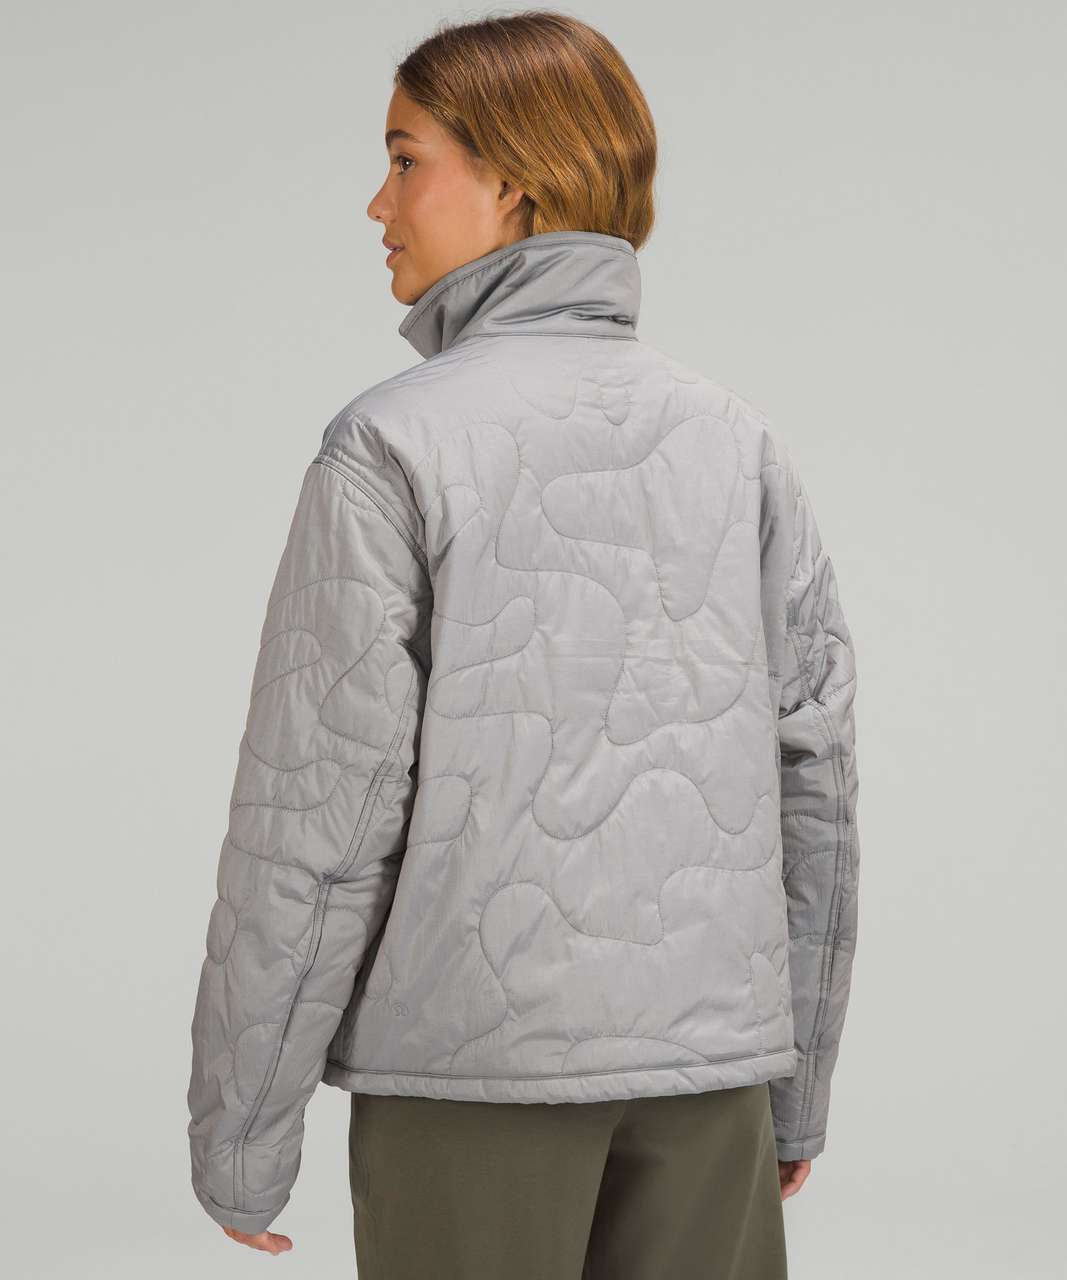 Lululemon Insulated Quilted Pullover Jacket - Heathered Gull Grey